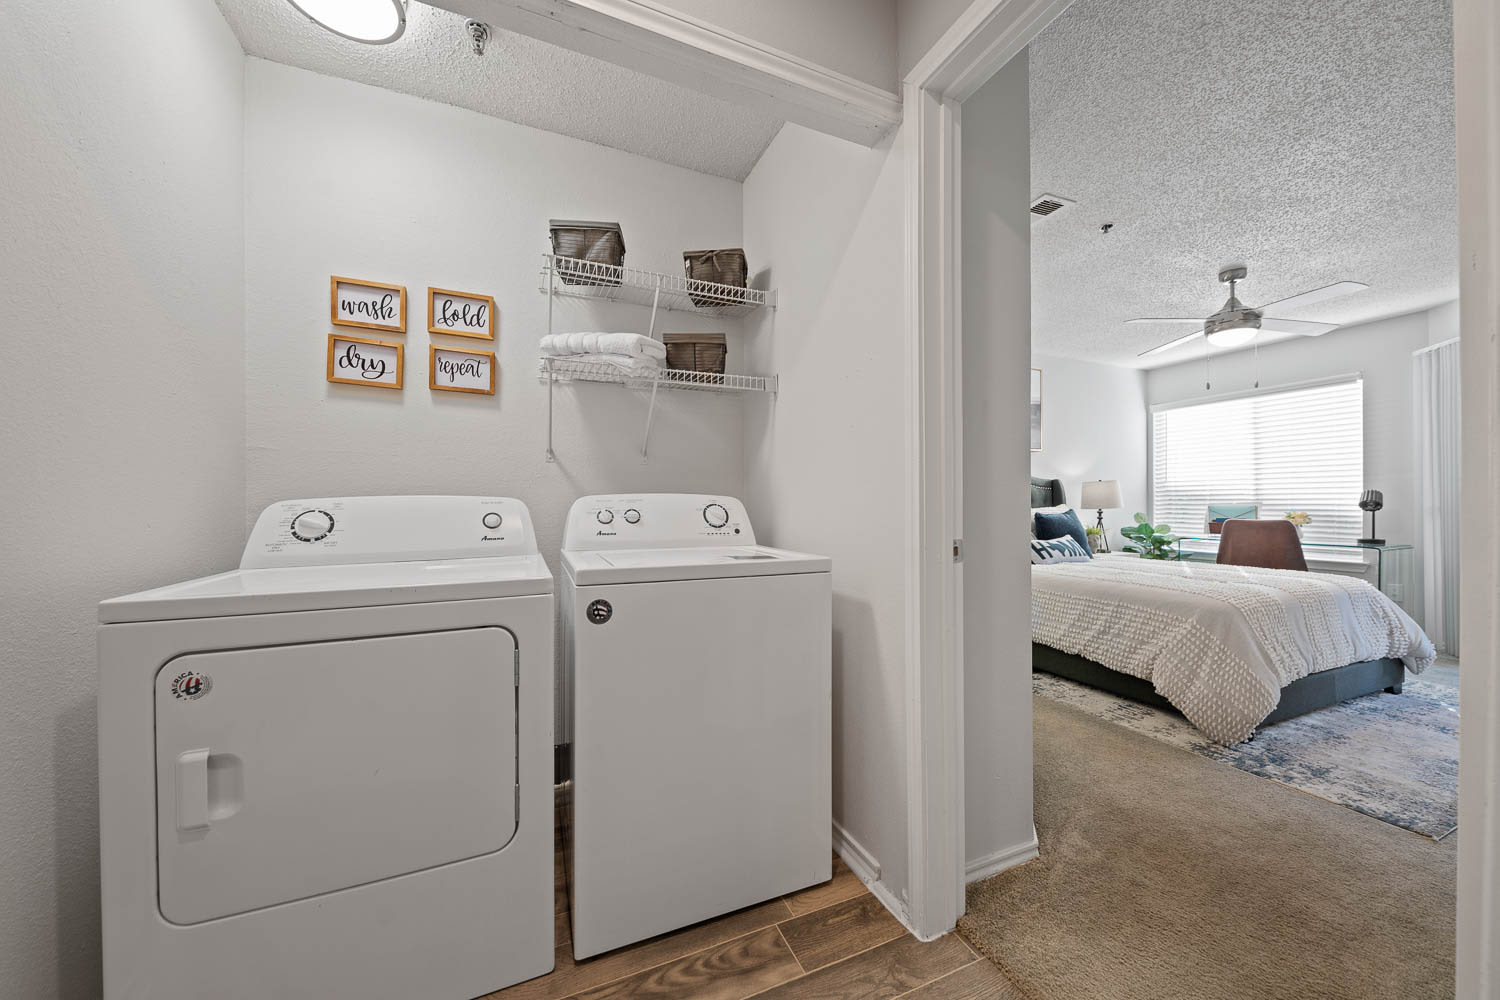 Full-size in-home washer and dryer at Somerset in Lewisville, Texas